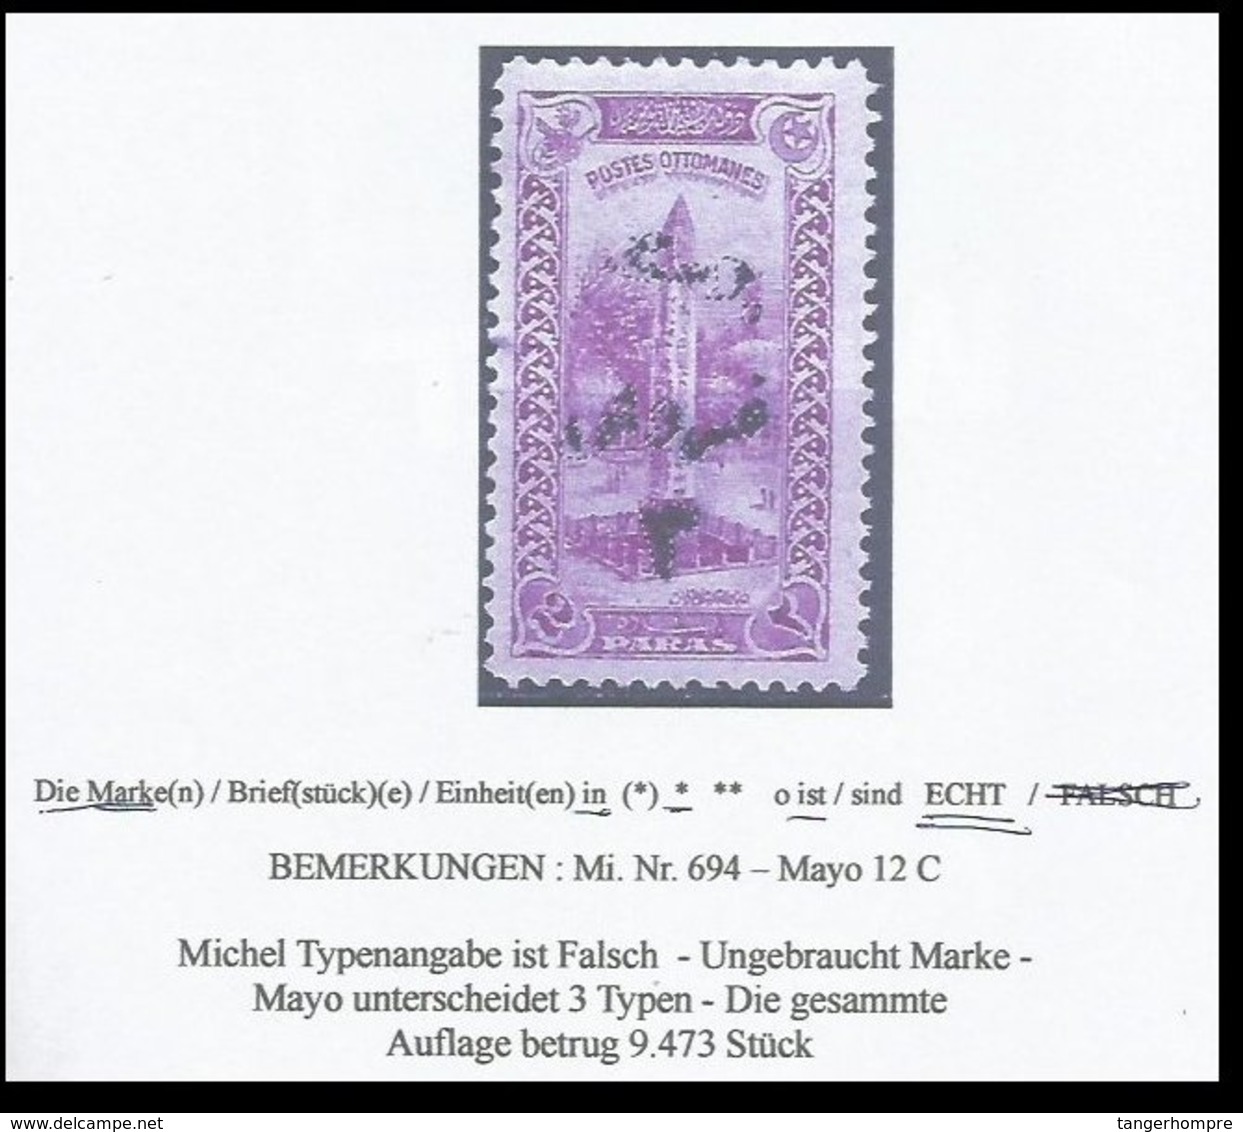 EARLY OTTOMAN SPECIALIZED FOR SPECIALIST, SEE...Mi. Nr. 694 - Mayo 12 C In Ungebraucht - 1920-21 Kleinasien